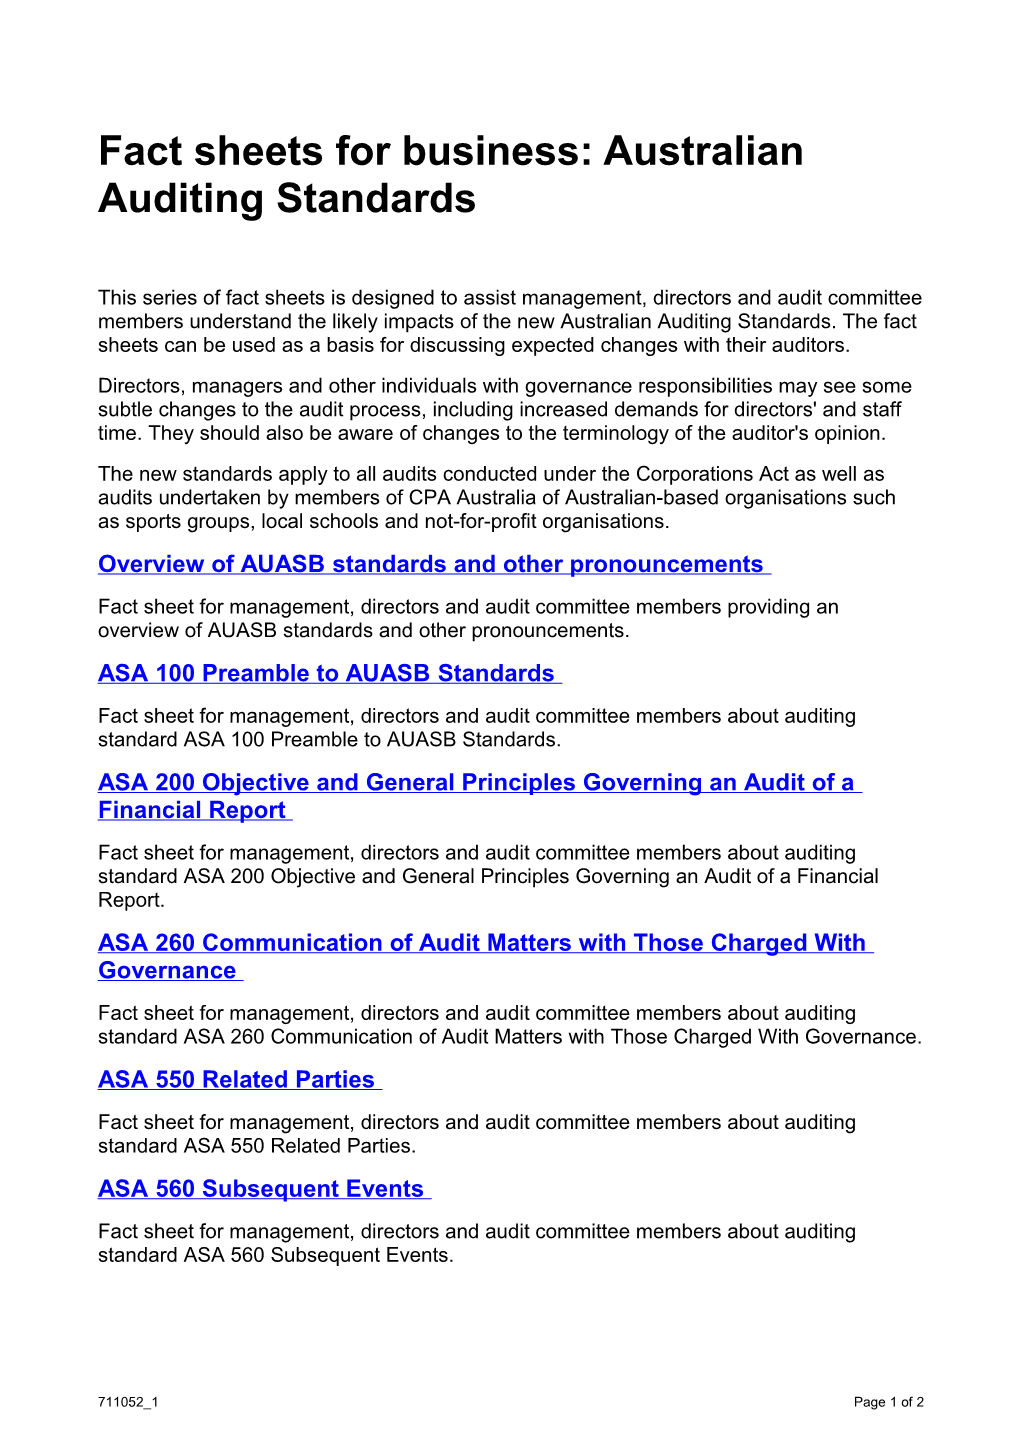 Fact Sheets for Business: Australian Auditing Standards